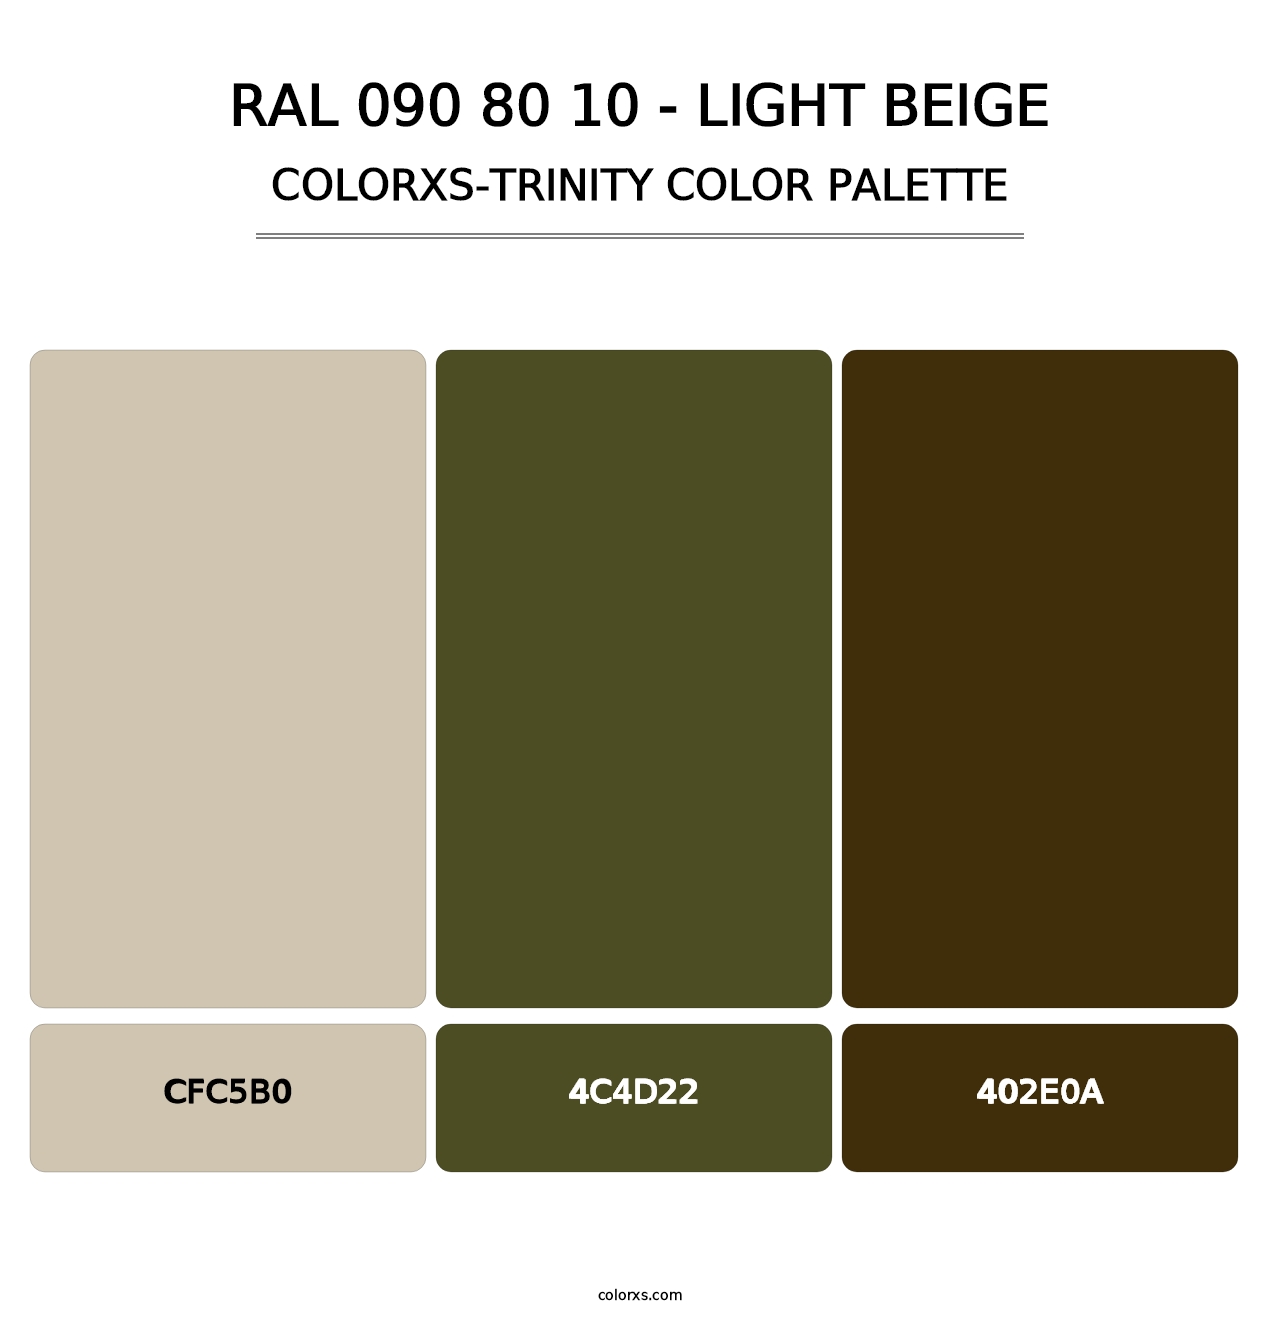 RAL 090 80 10 - Light Beige - Colorxs Trinity Palette